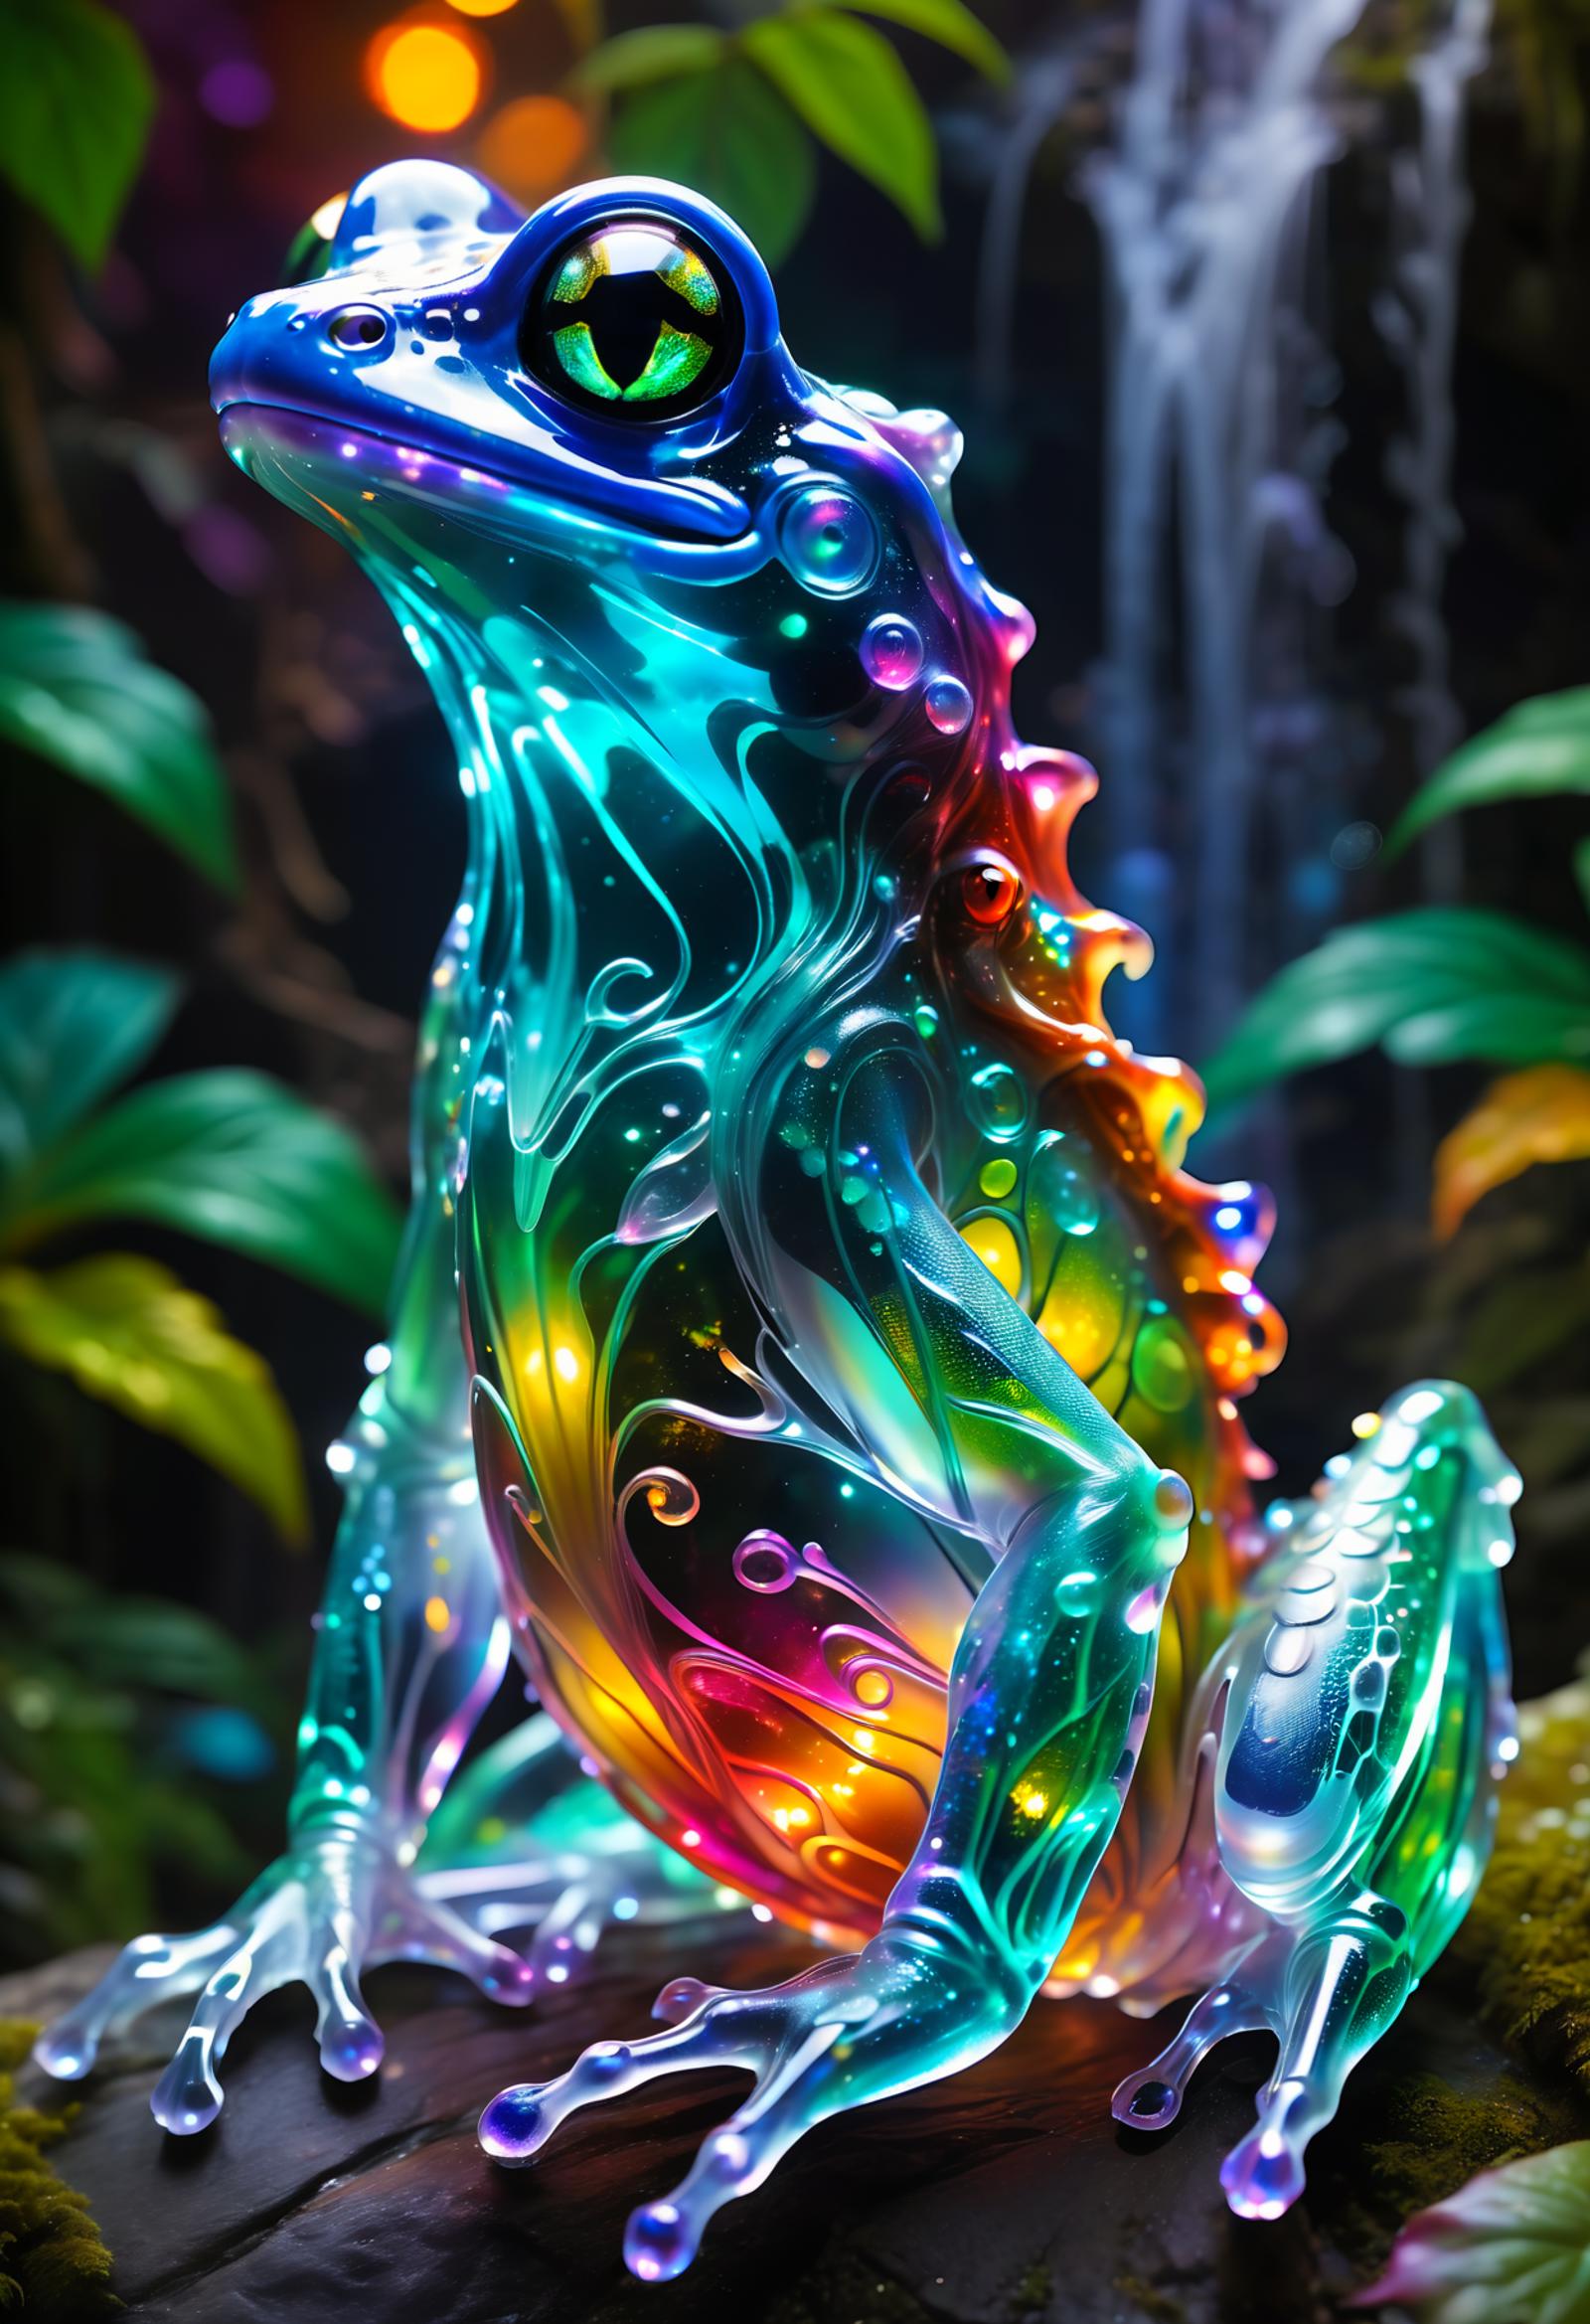 A brightly colored glass frog sculpture sits on a mossy rock.